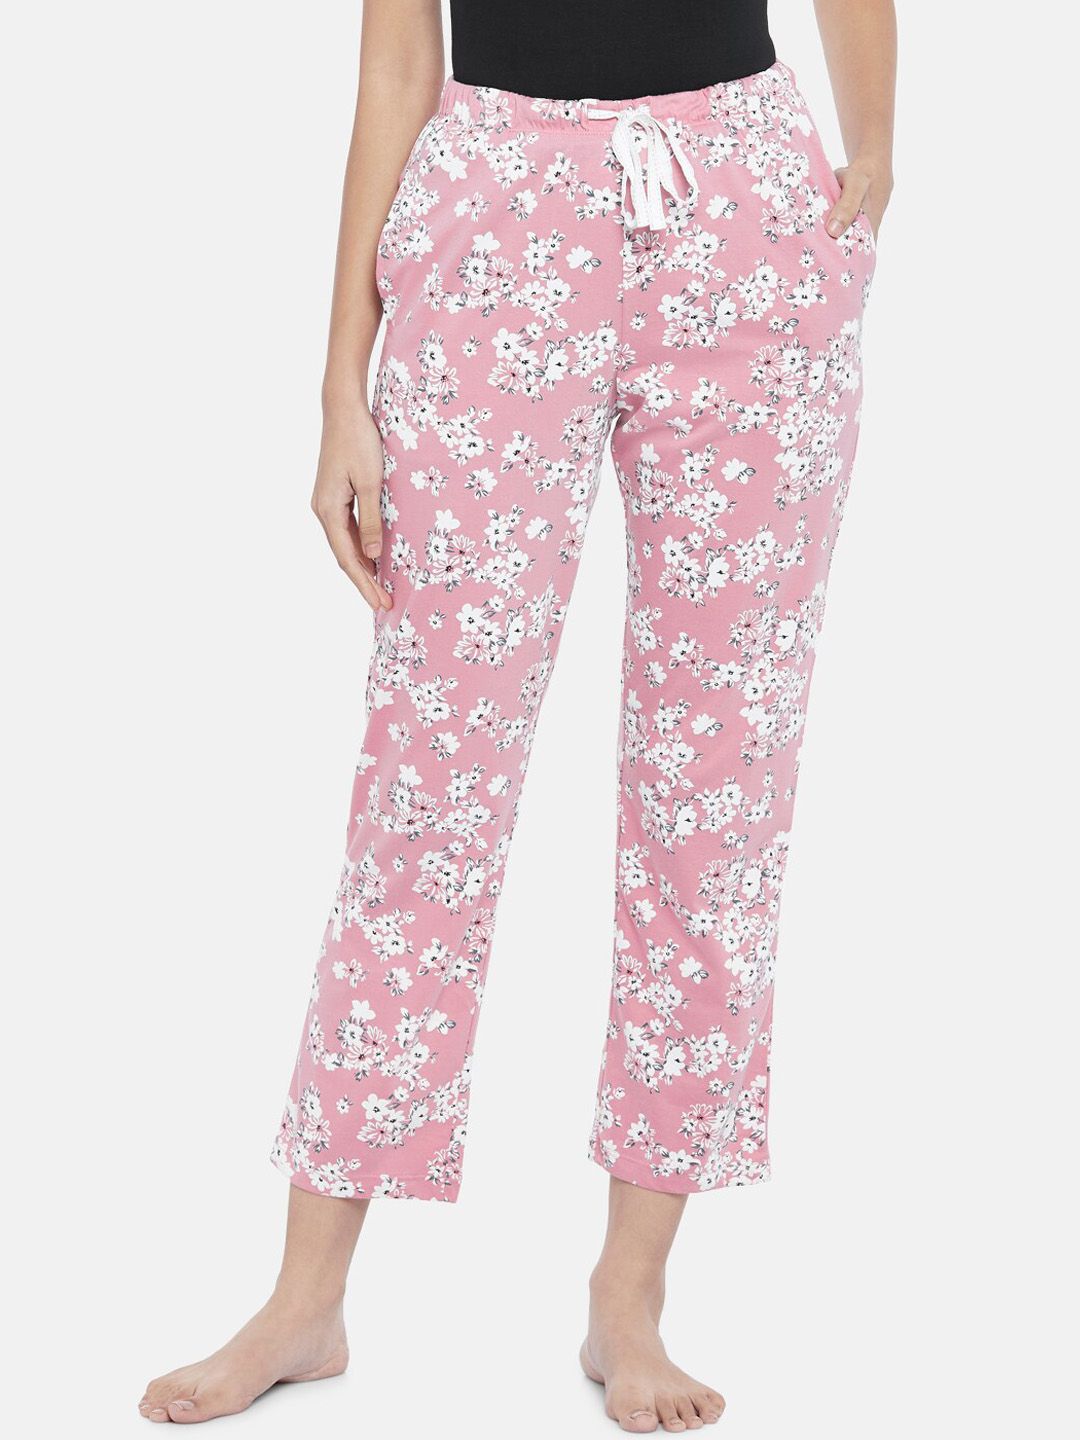 Dreamz by Pantaloons Women Pink & White Floral Printed Cotton Lounge Pants Price in India